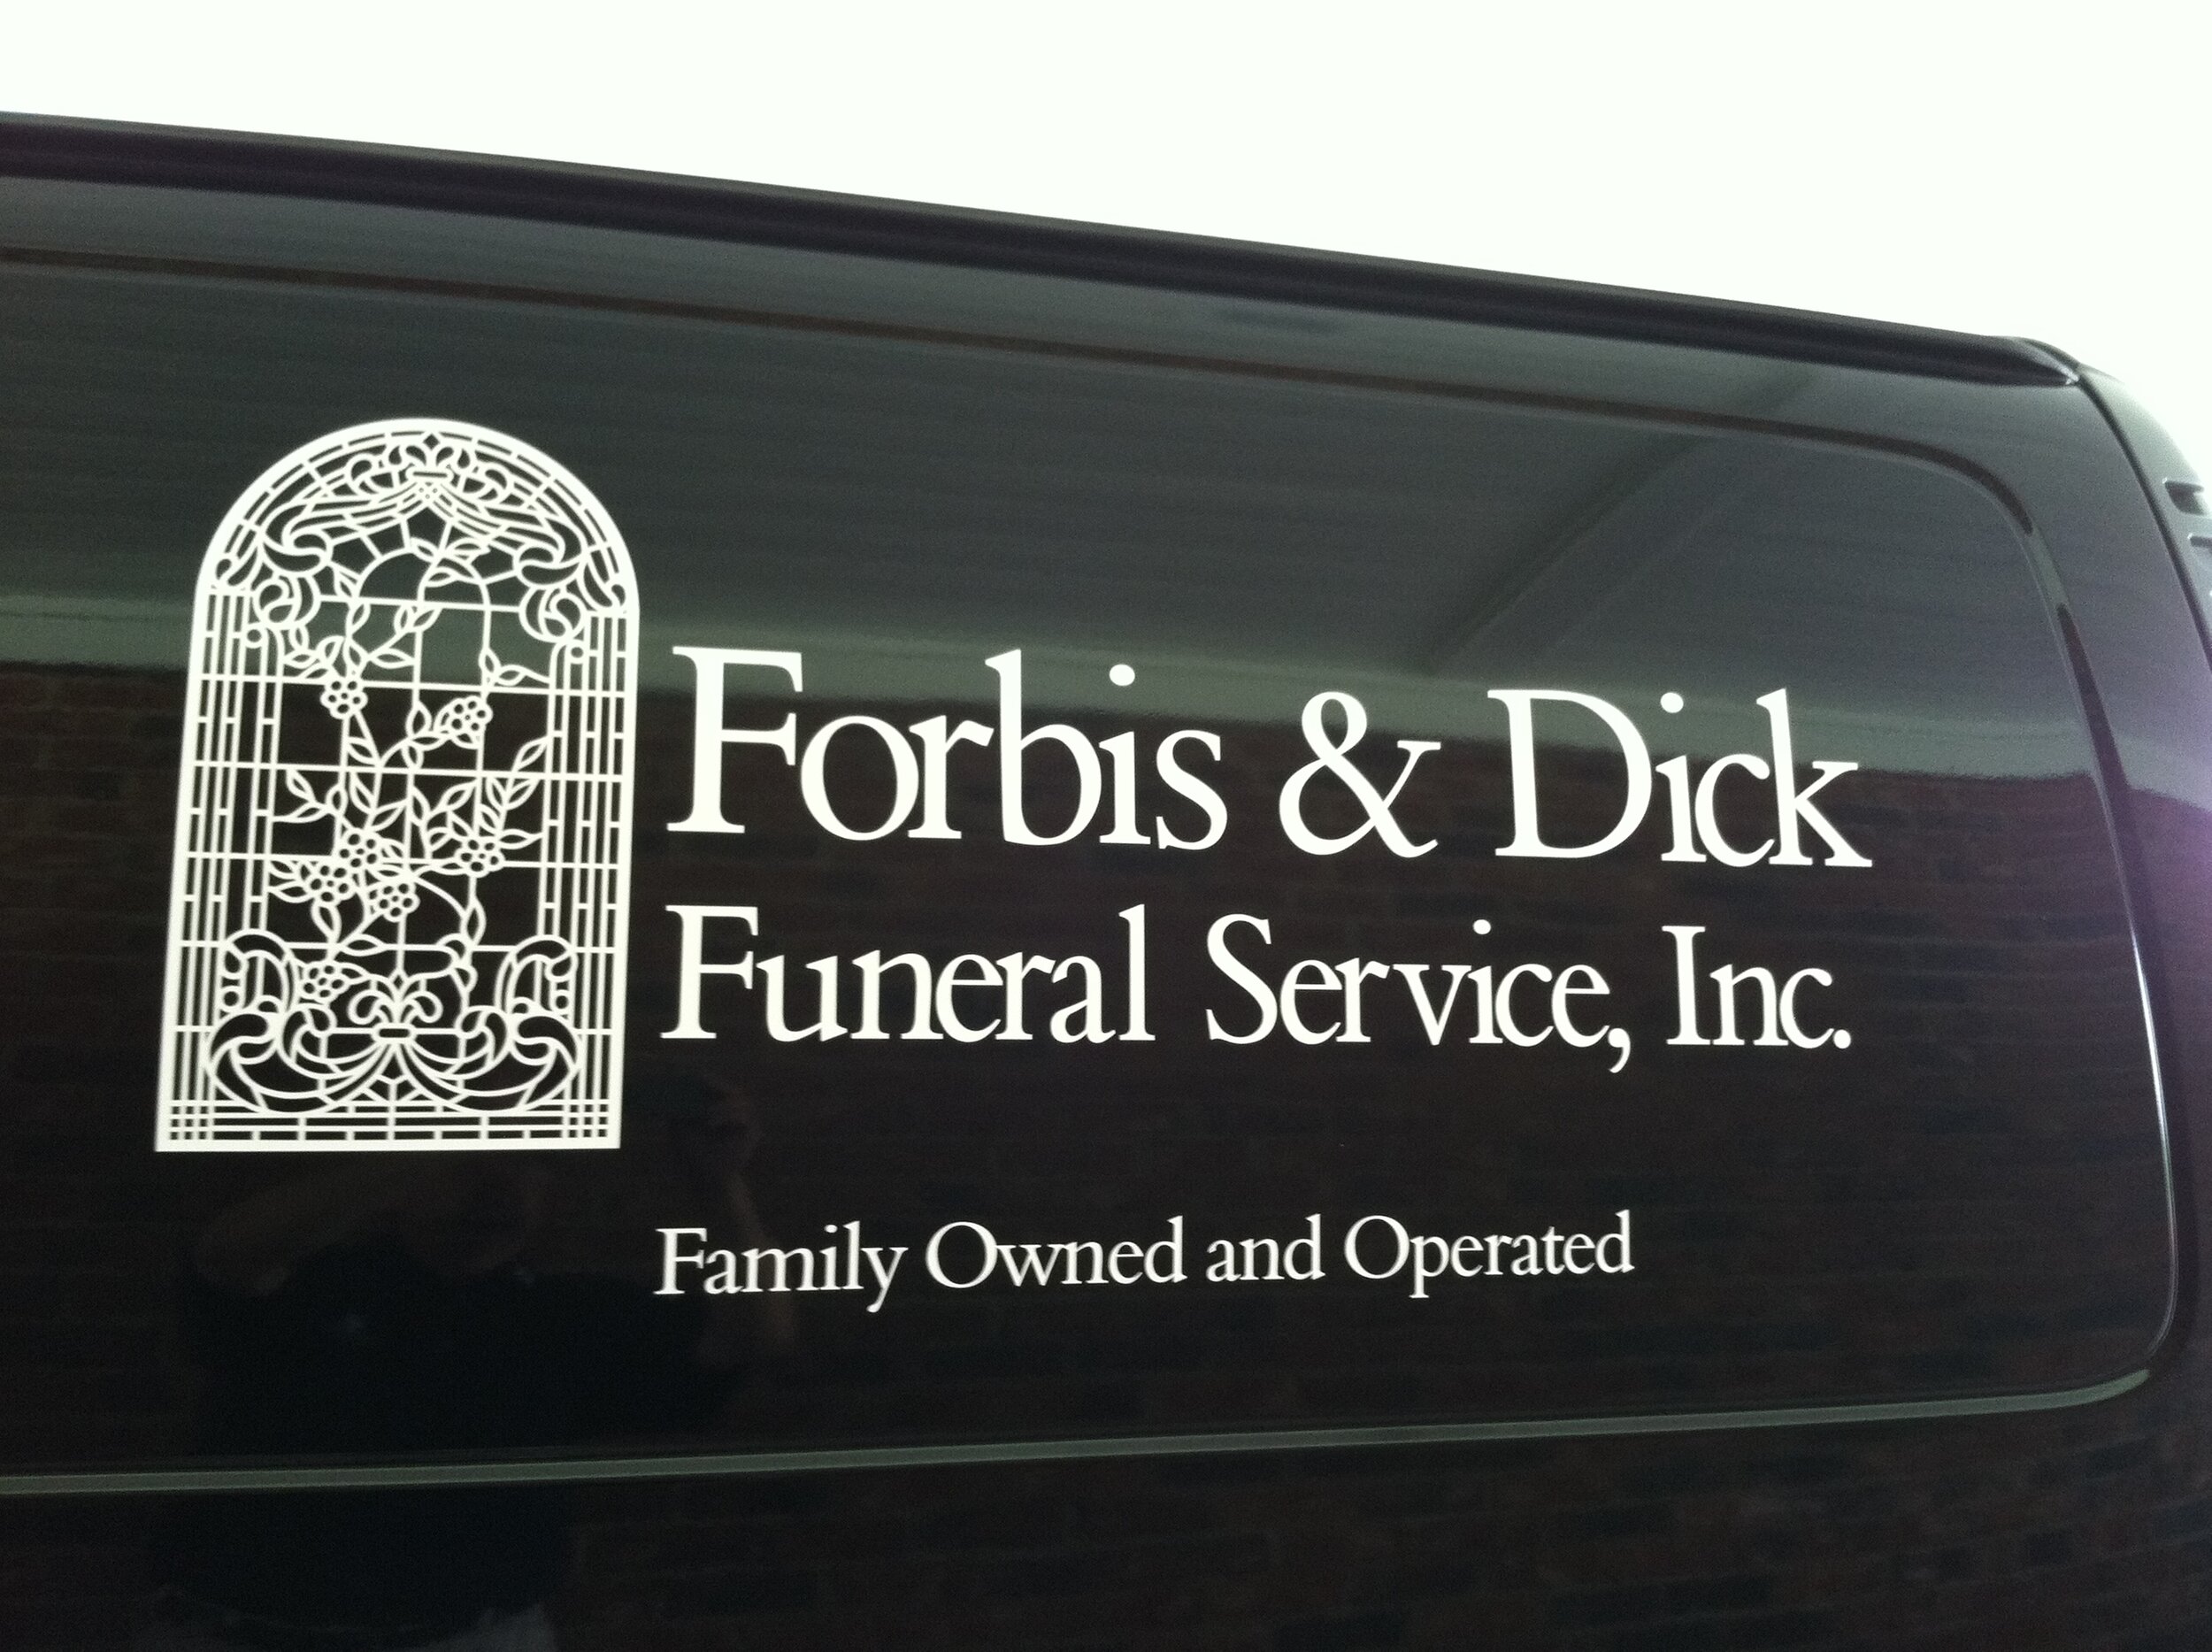 Forbis & Dick Funeral Service